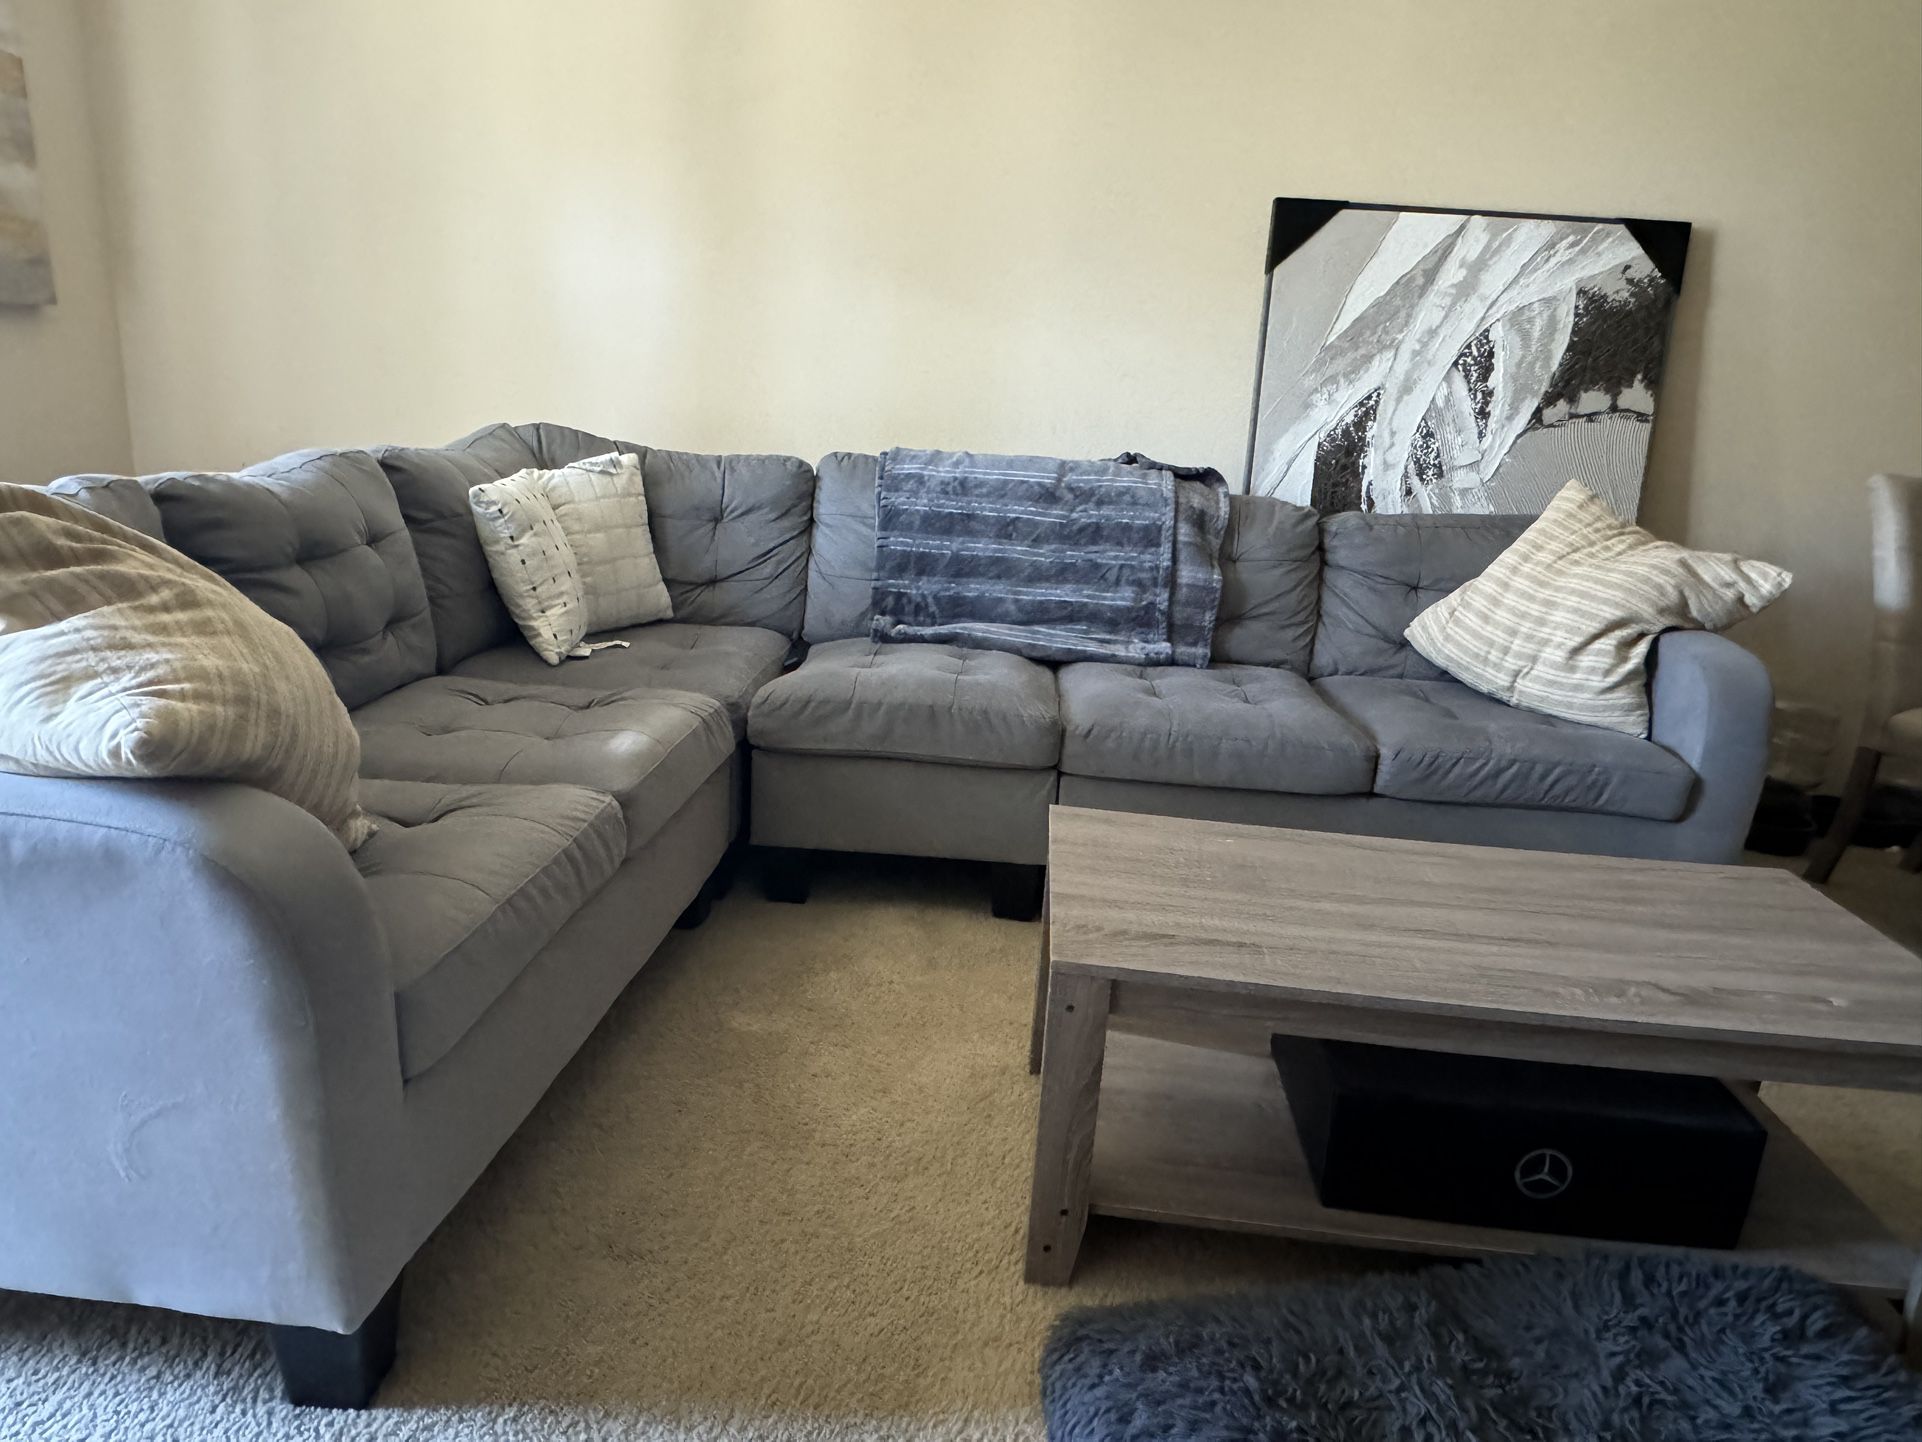 L-Shaped sectional couch